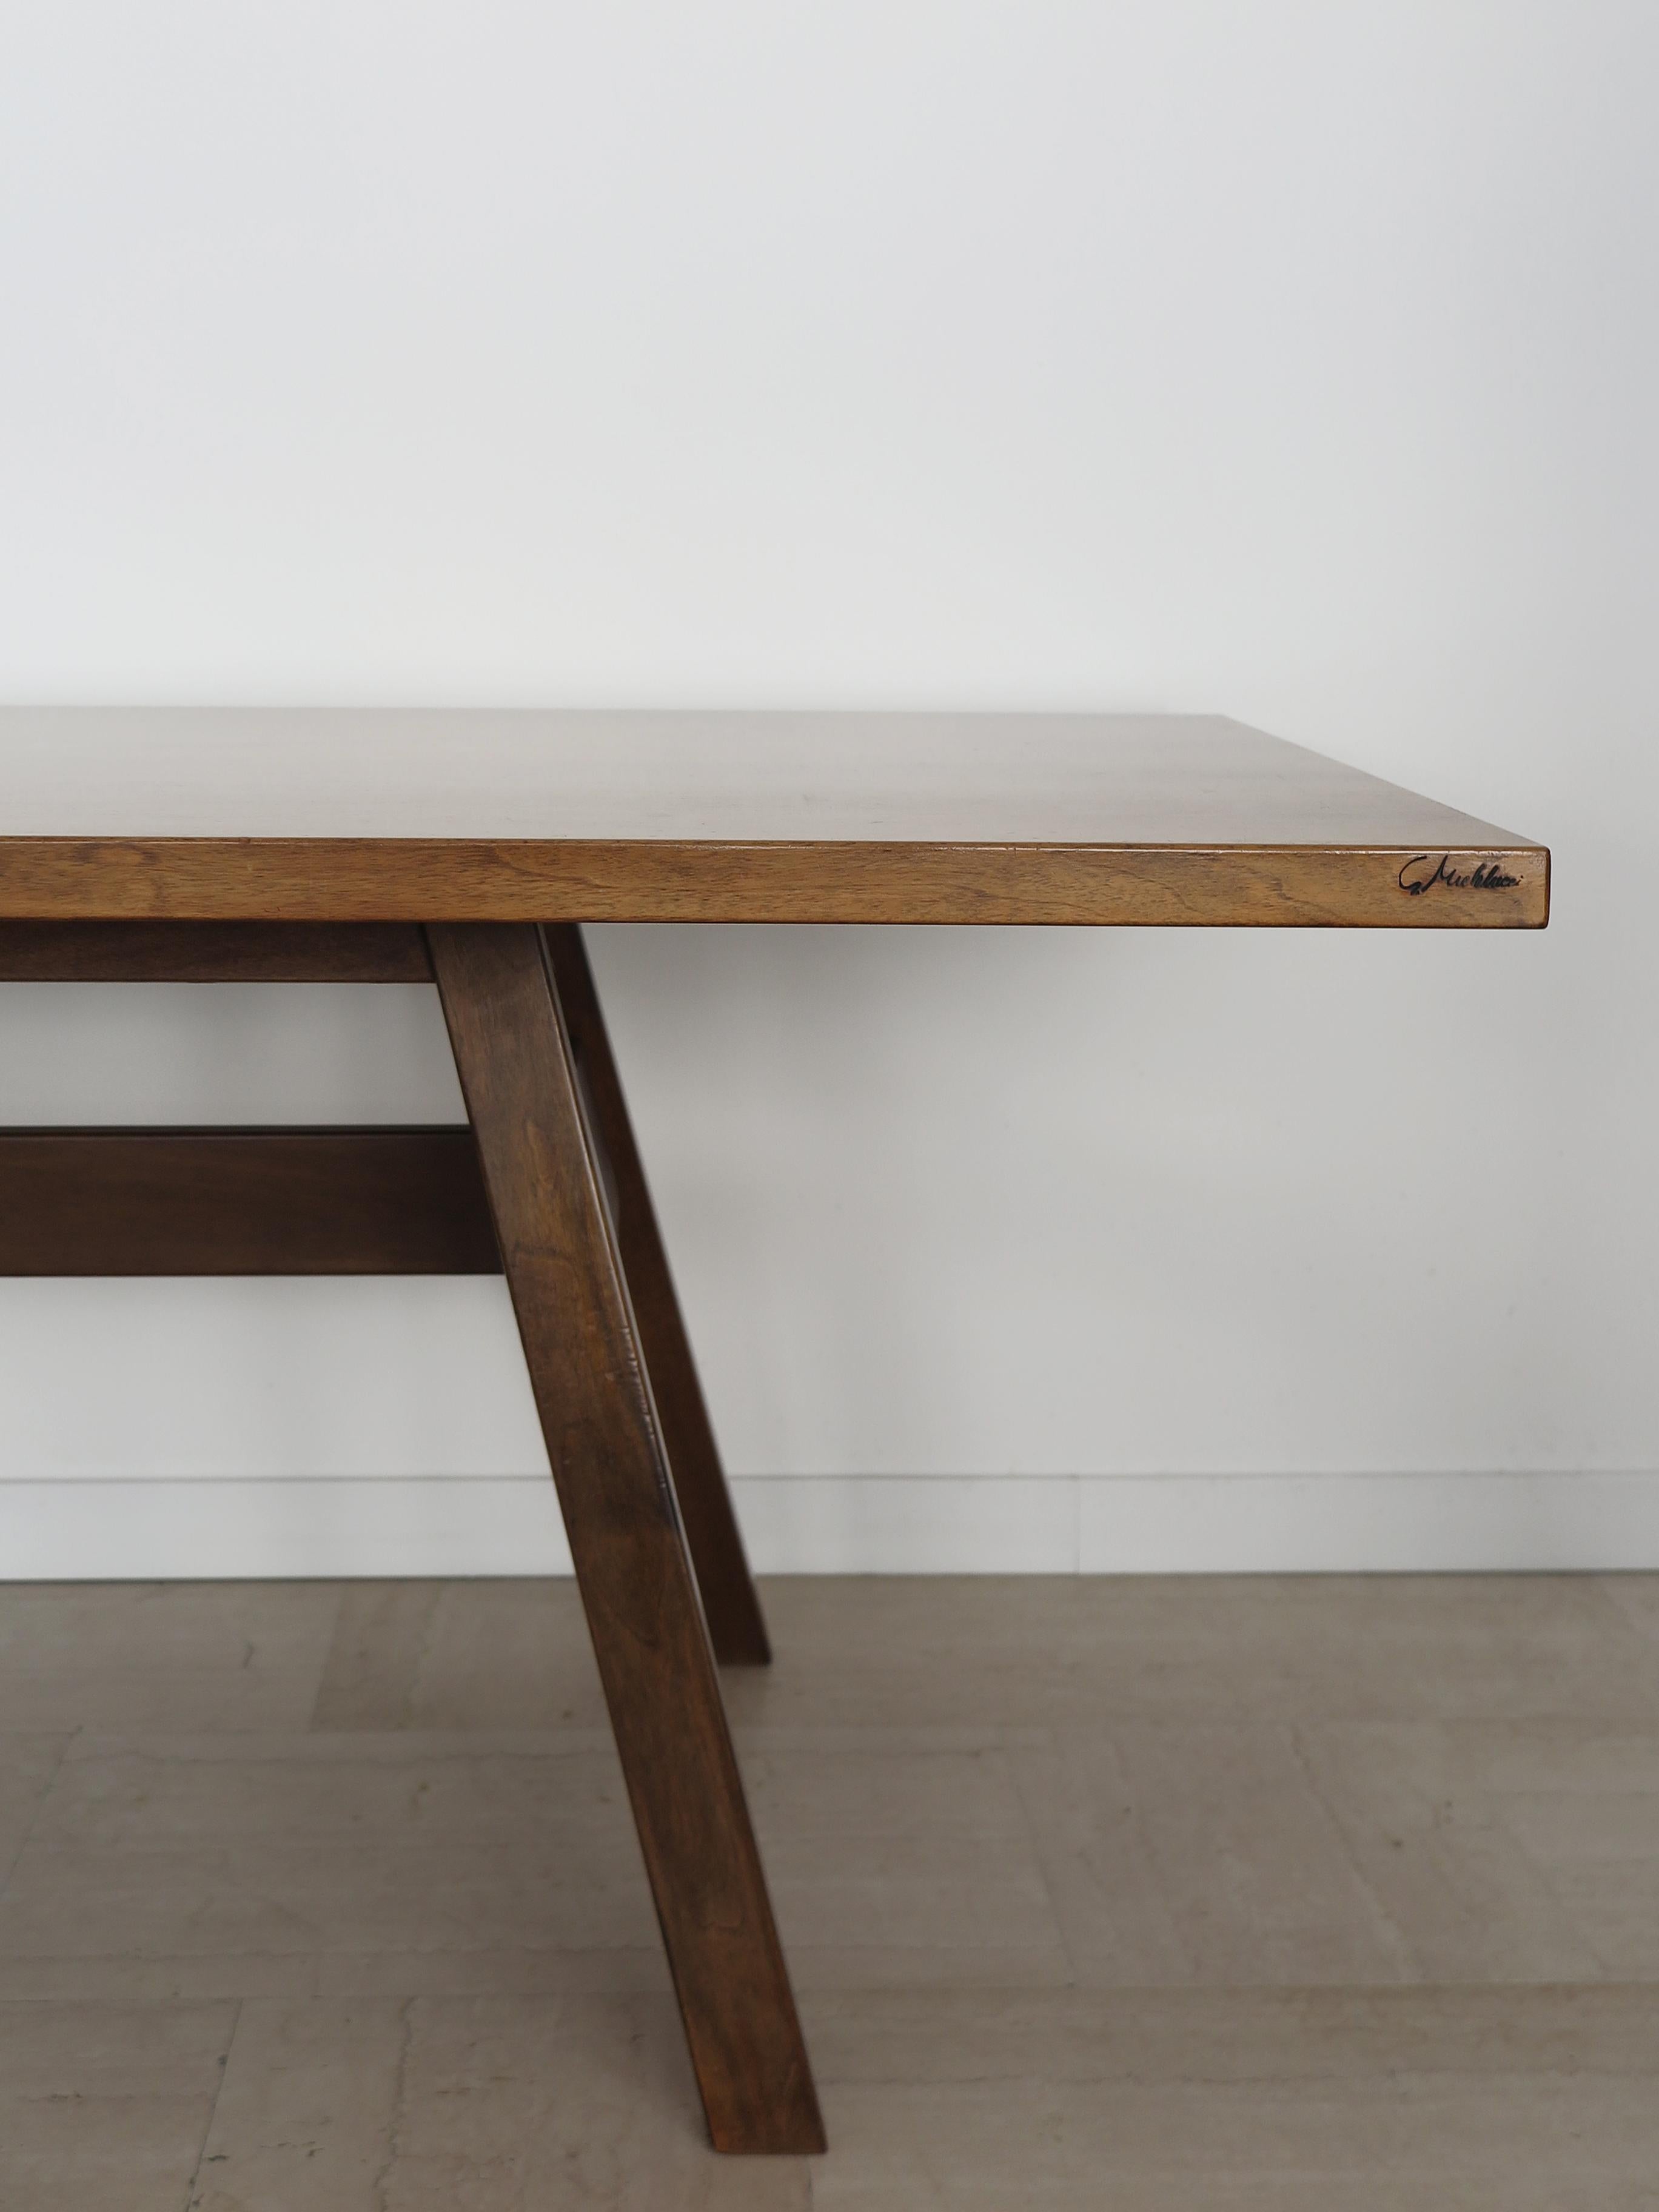 Mid-20th Century Giovanni Michelucci for Poltronova Italian Midcentury Consolle Dining Table 1960 For Sale